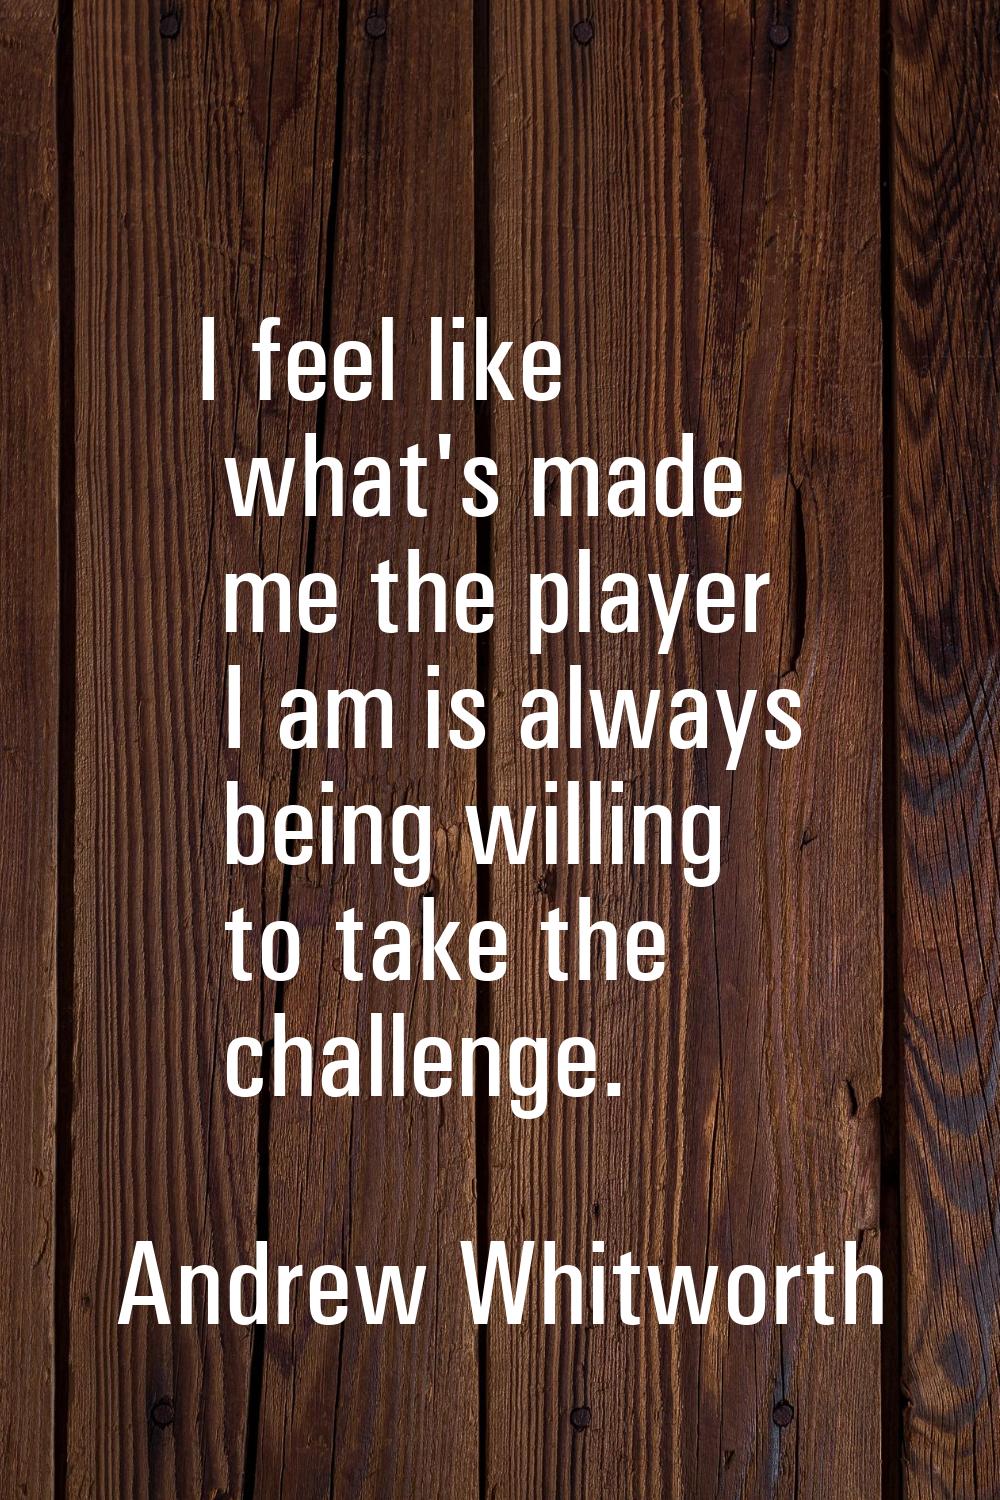 I feel like what's made me the player I am is always being willing to take the challenge.